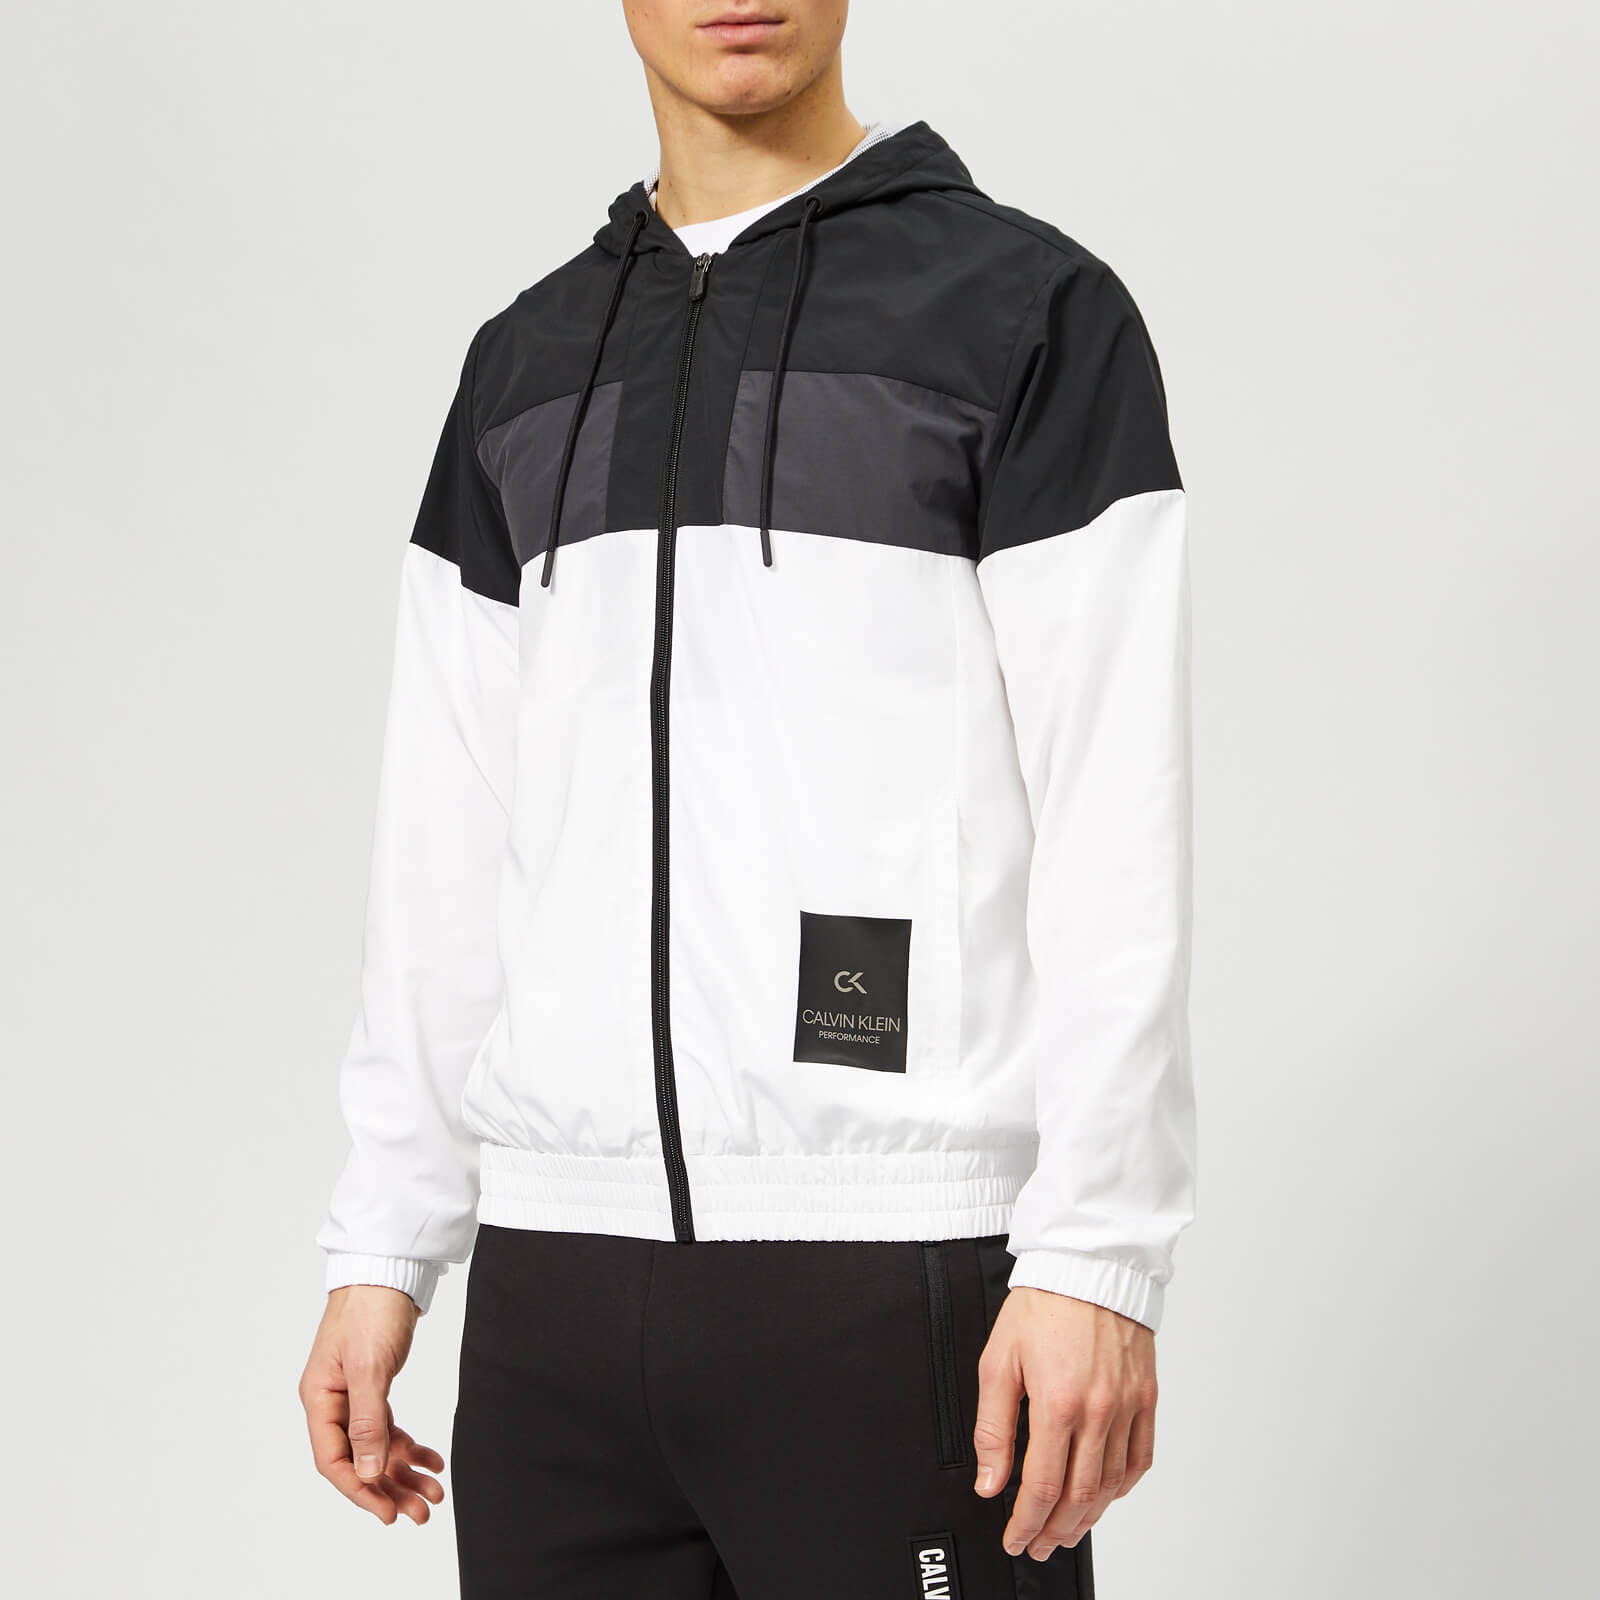 Calvin Klein Black And White Jacket Top Sellers, UP TO 68% OFF 